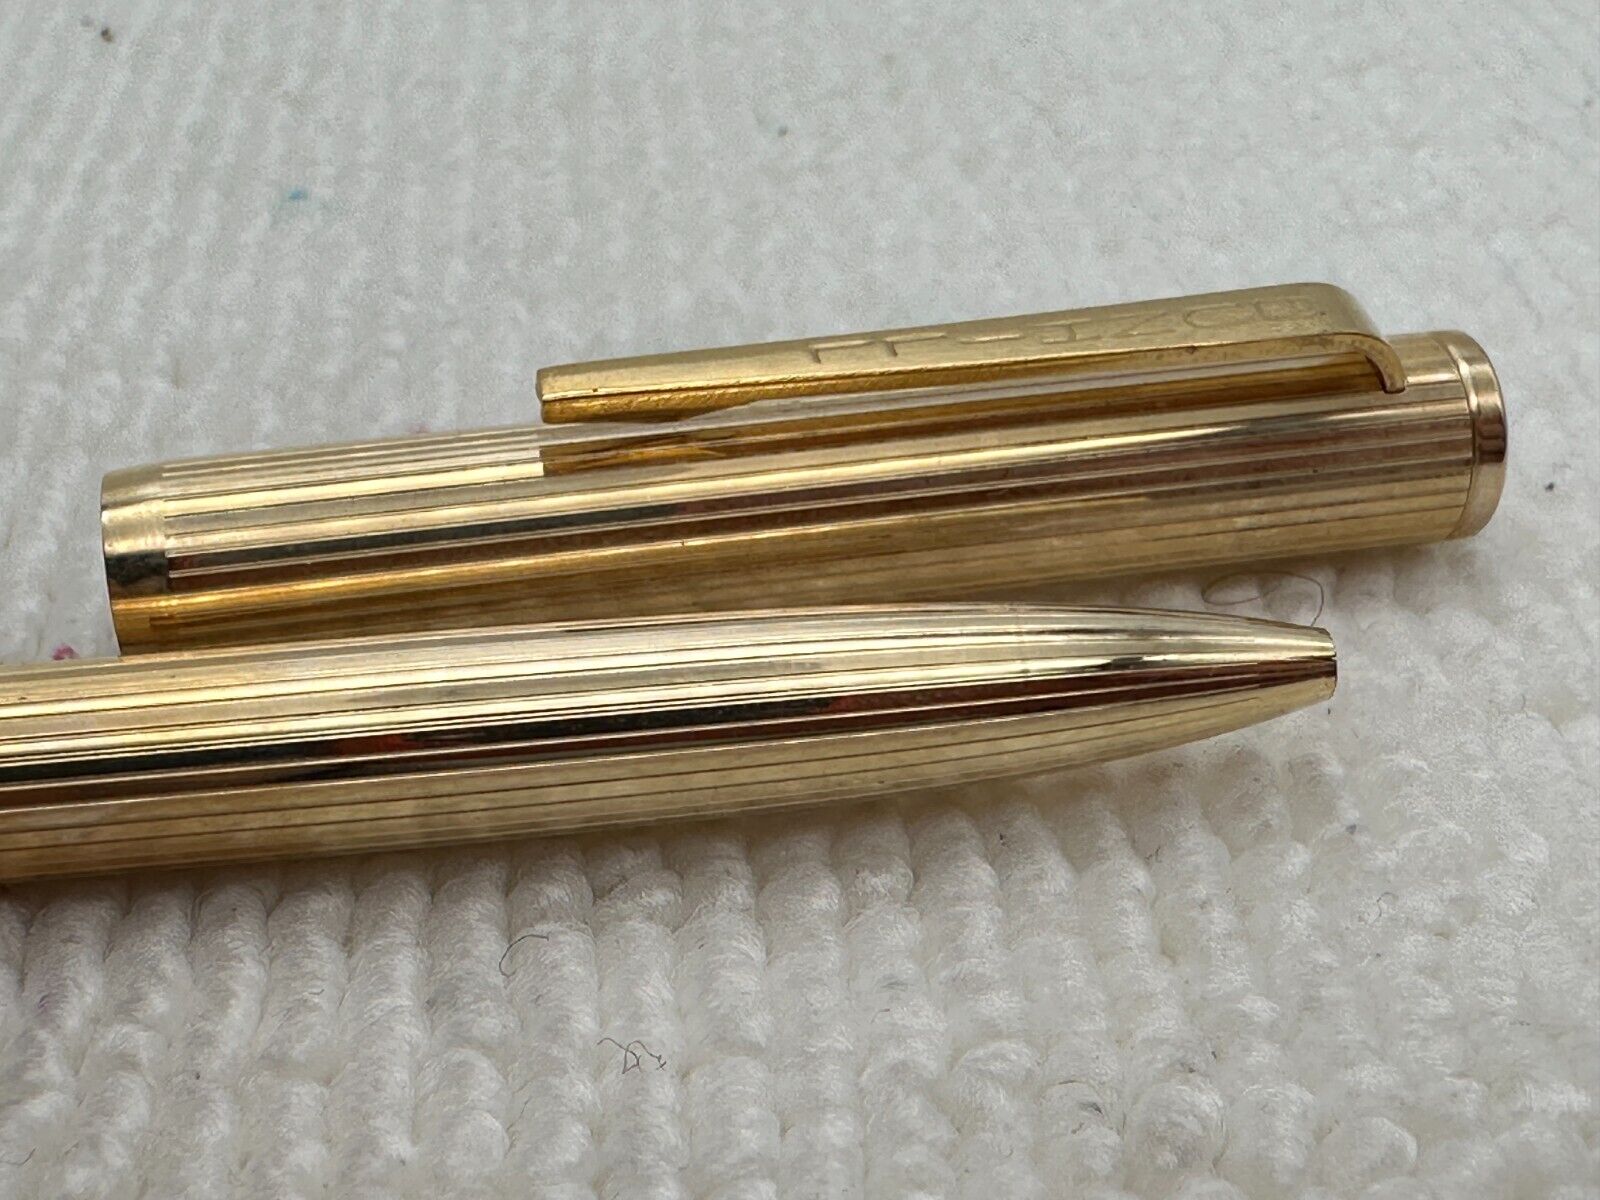 Lovely Rare Vintage Alfred Dunhill Rollerball Pen Gold Plated New Old Stock MINT